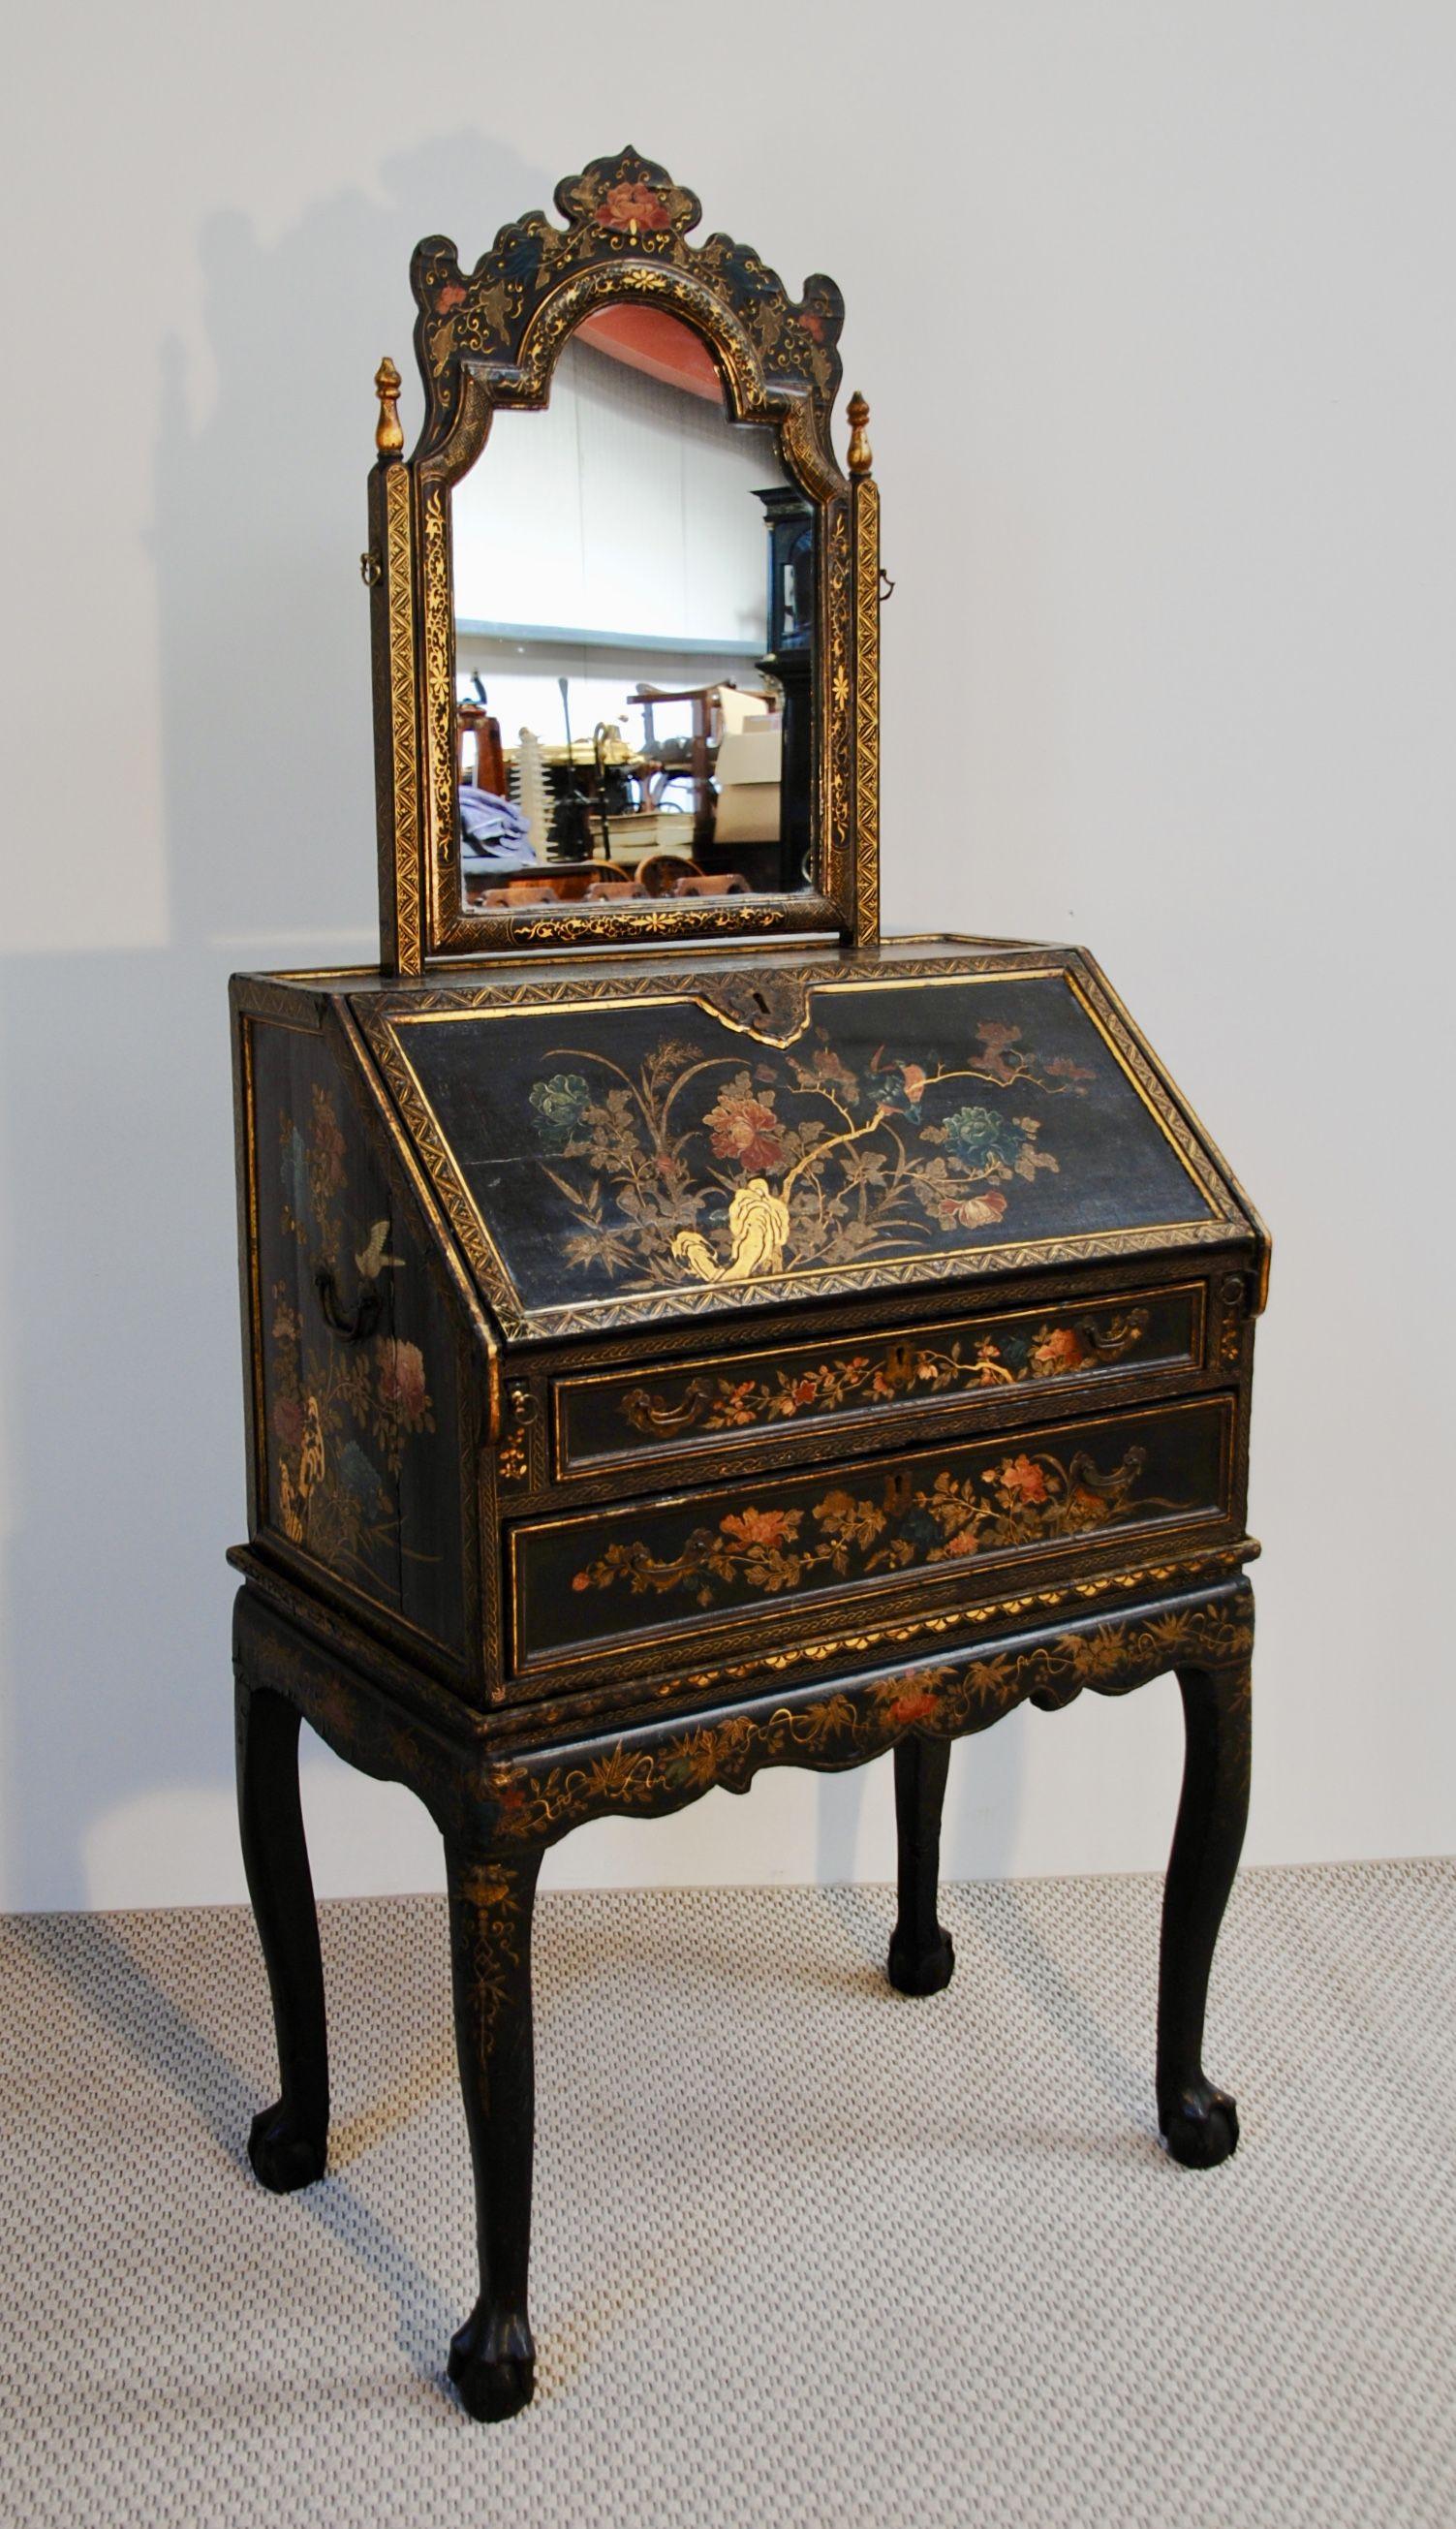 A Chinese export lacquer bureau on stand decorated with an unusual flower design in unrestored country house condition.